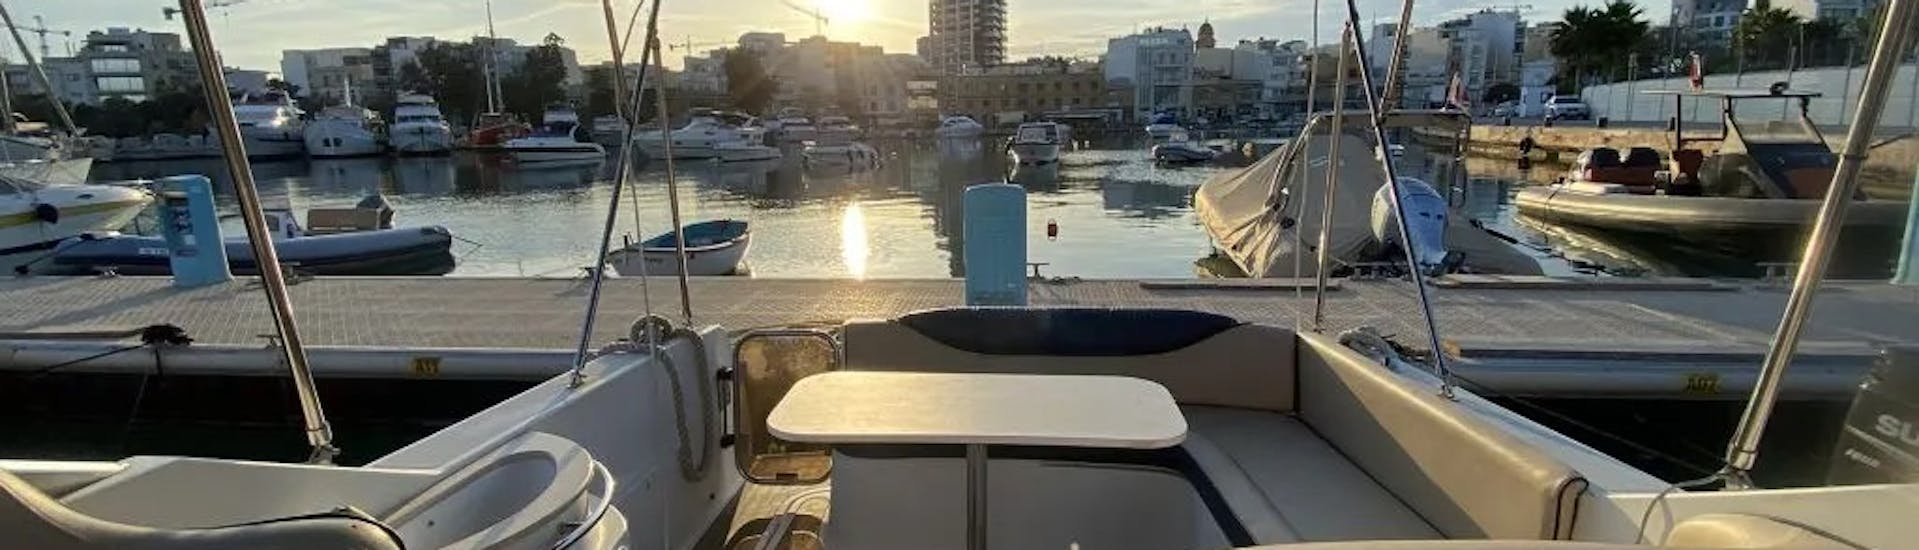 View from the boat in the harbour during the Full Day or Sunset Private Boat Trip from Gżira (up to 4 people).